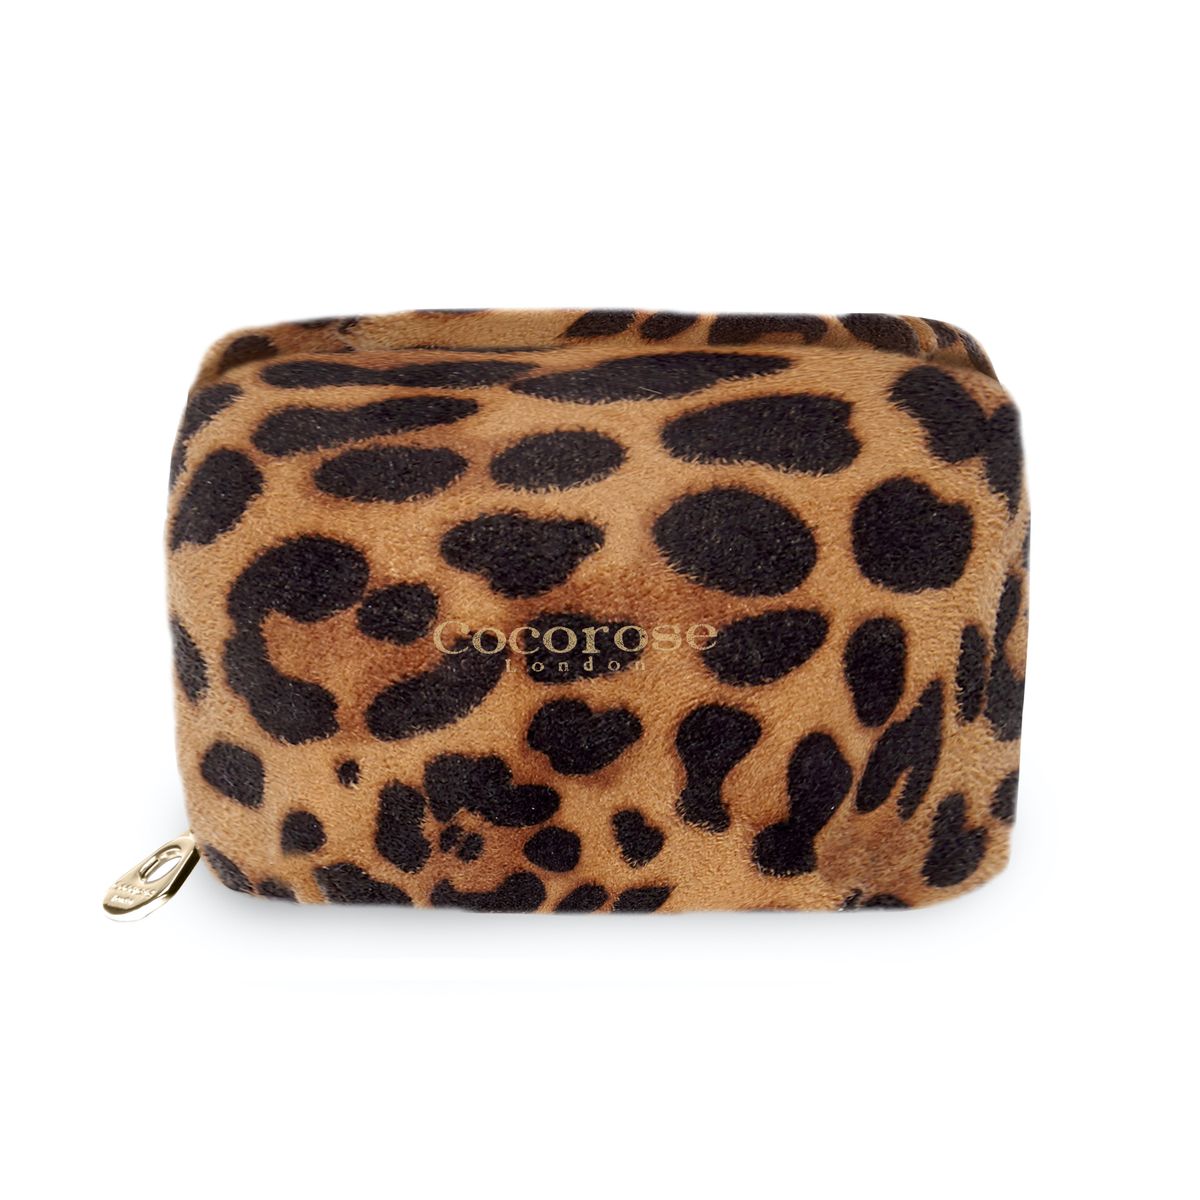 Carnaby Leopard Print Purse for Carnaby Leopard ballet flats from Cocorose London